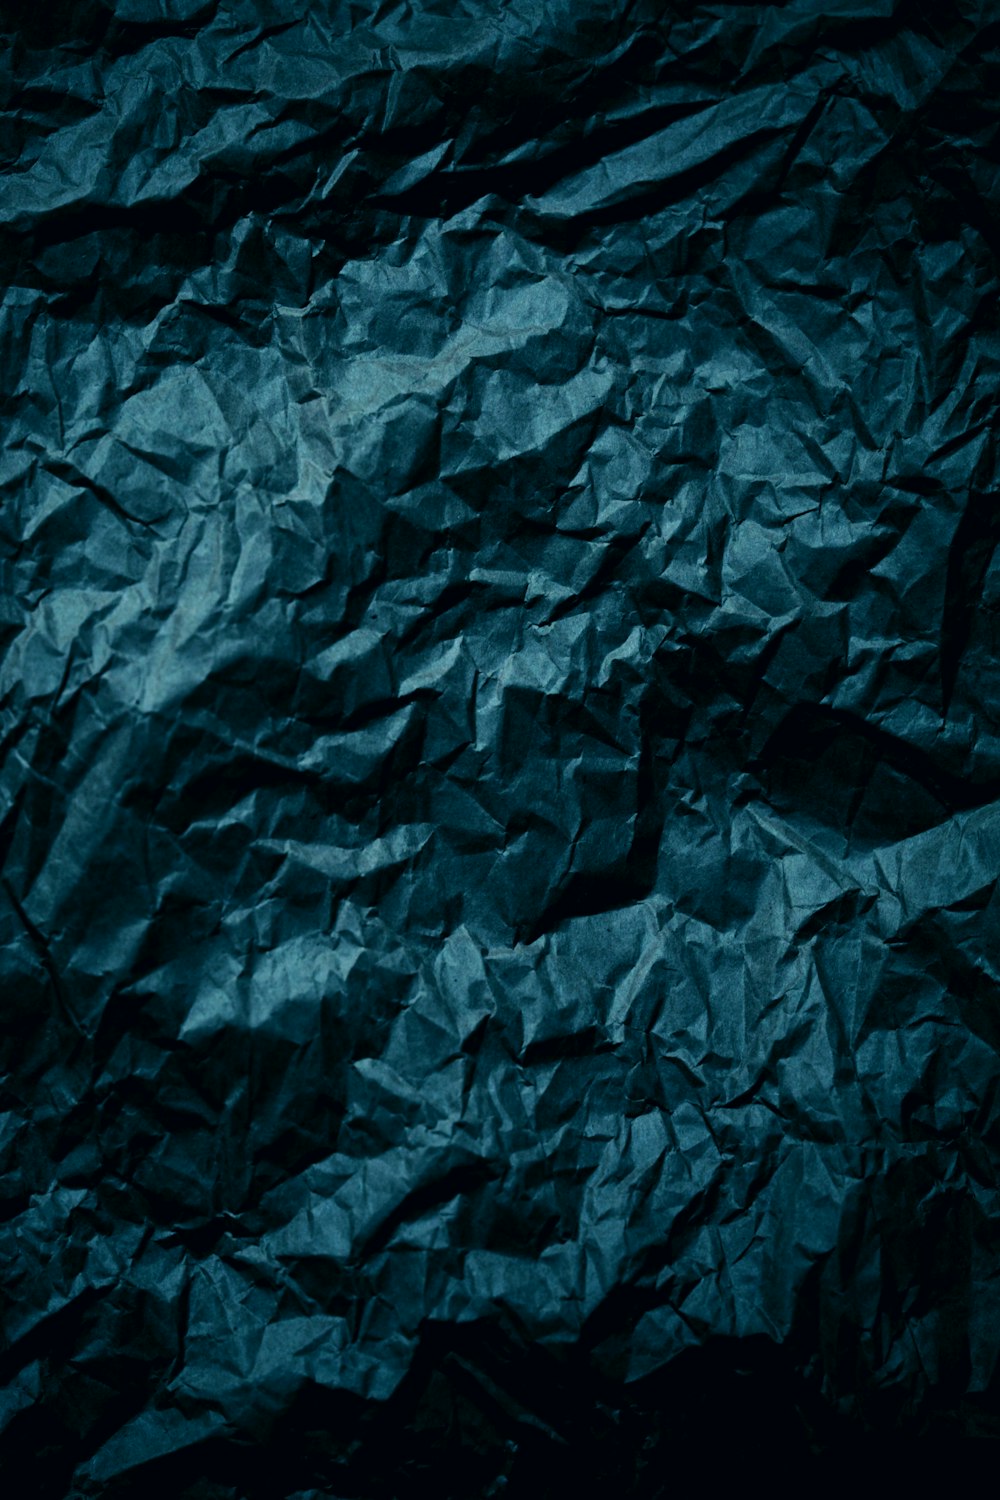 Background From Blue Paper Texture Stock Photo, Picture and Royalty Free  Image. Image 18249802.